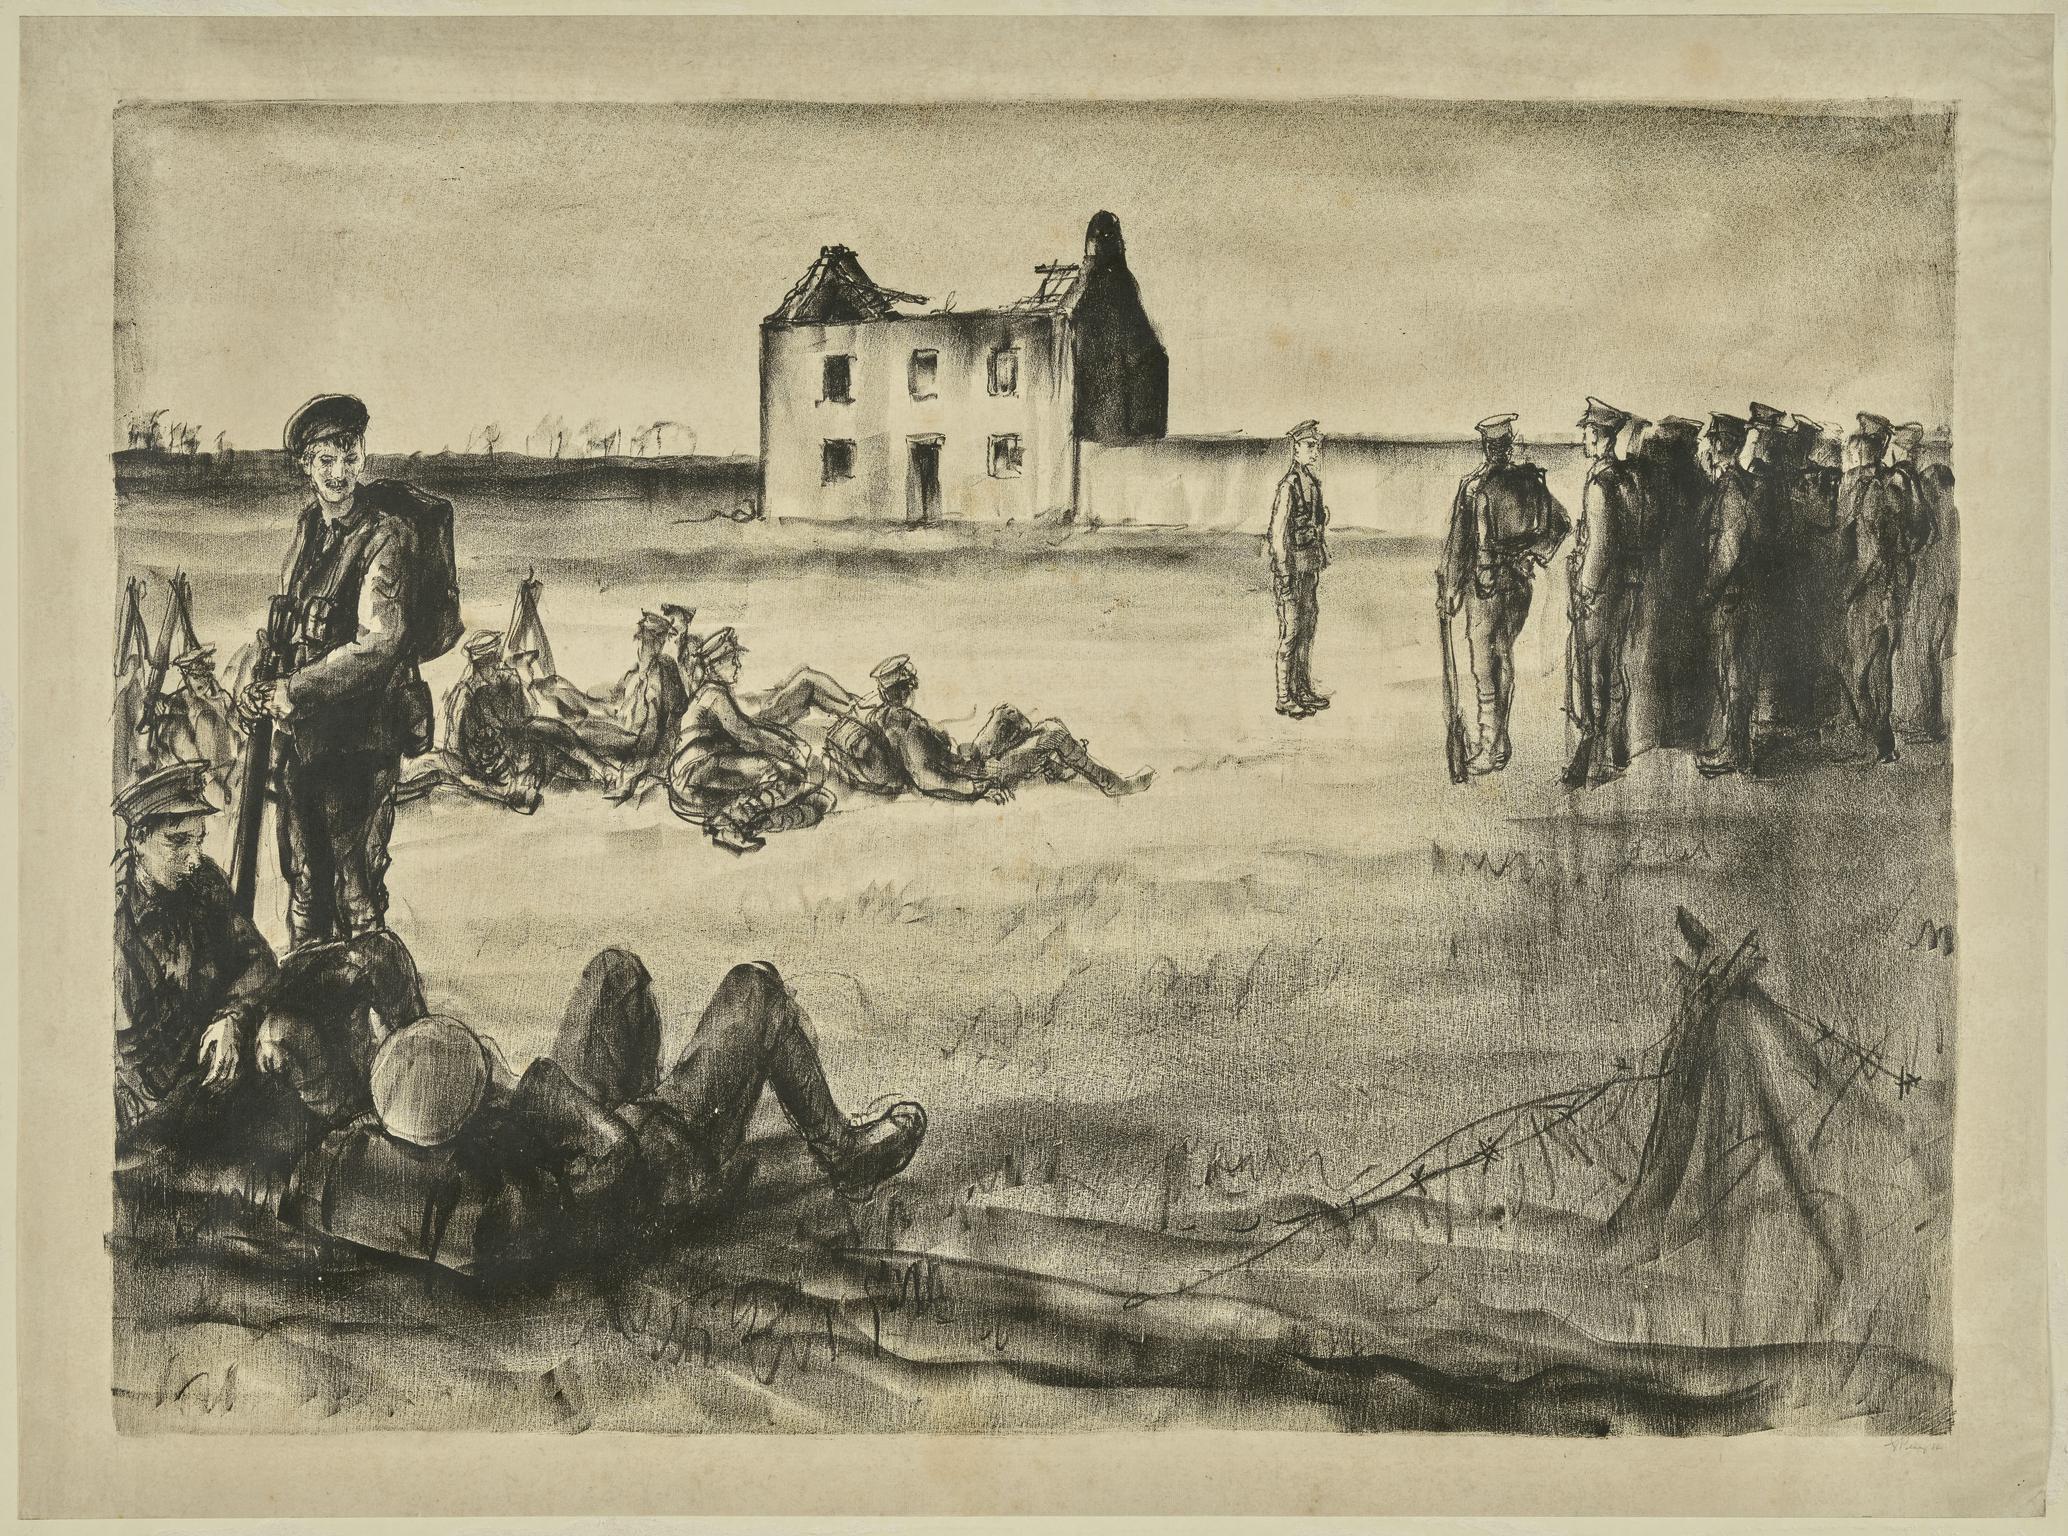 Soldiers seated and parading in front of a ruined house